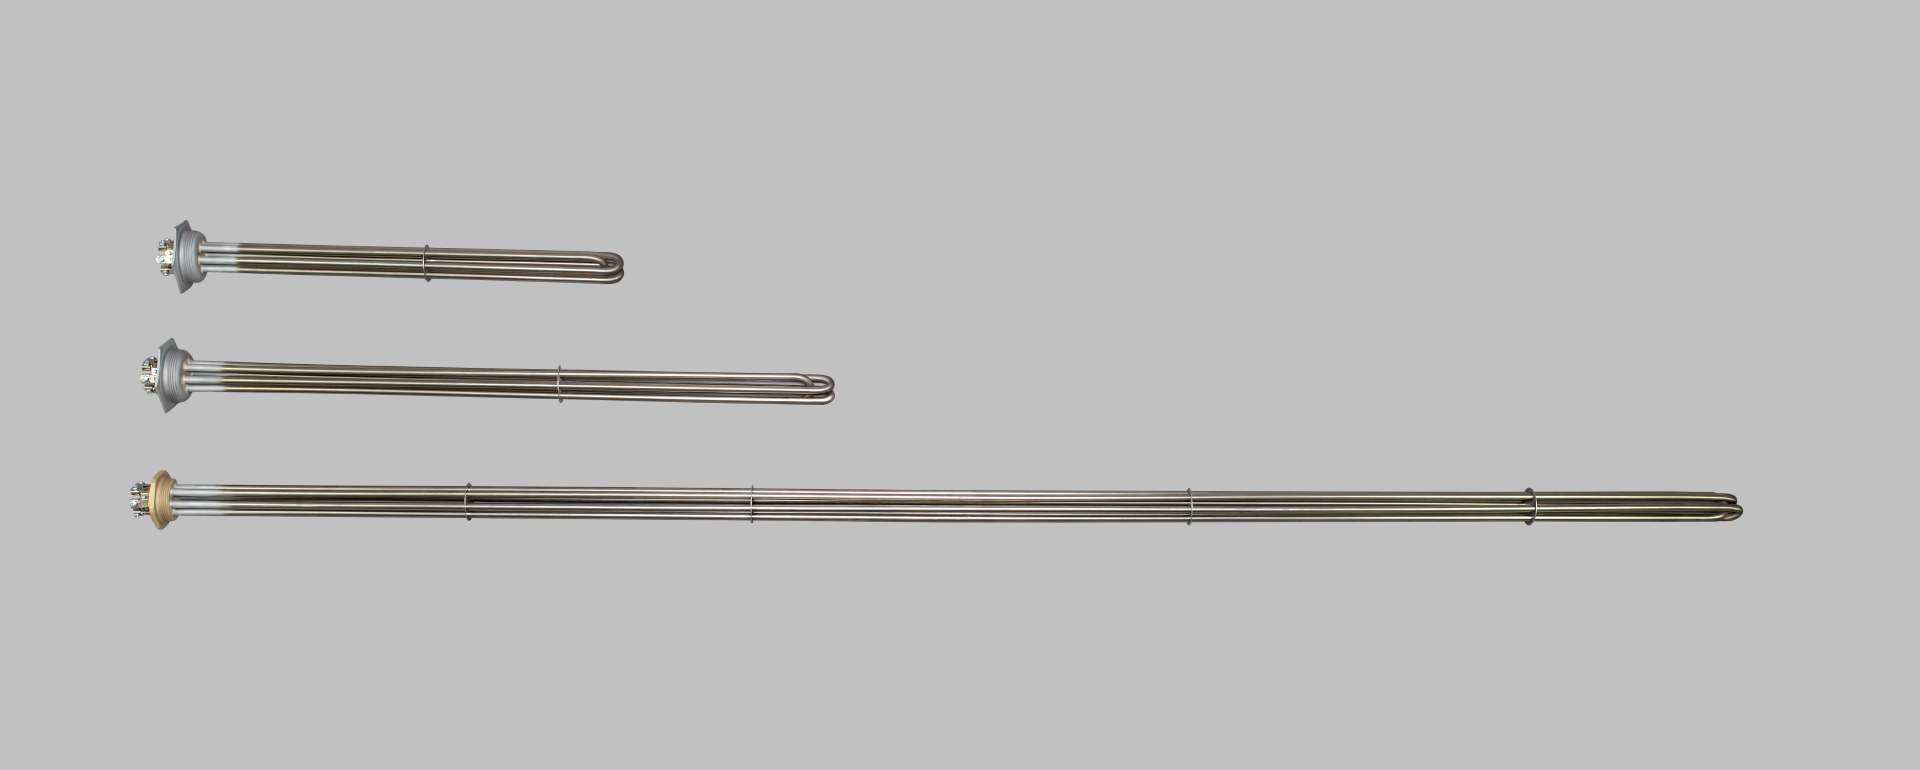 Heating elements dedicated to operate in oil or water furnace-0